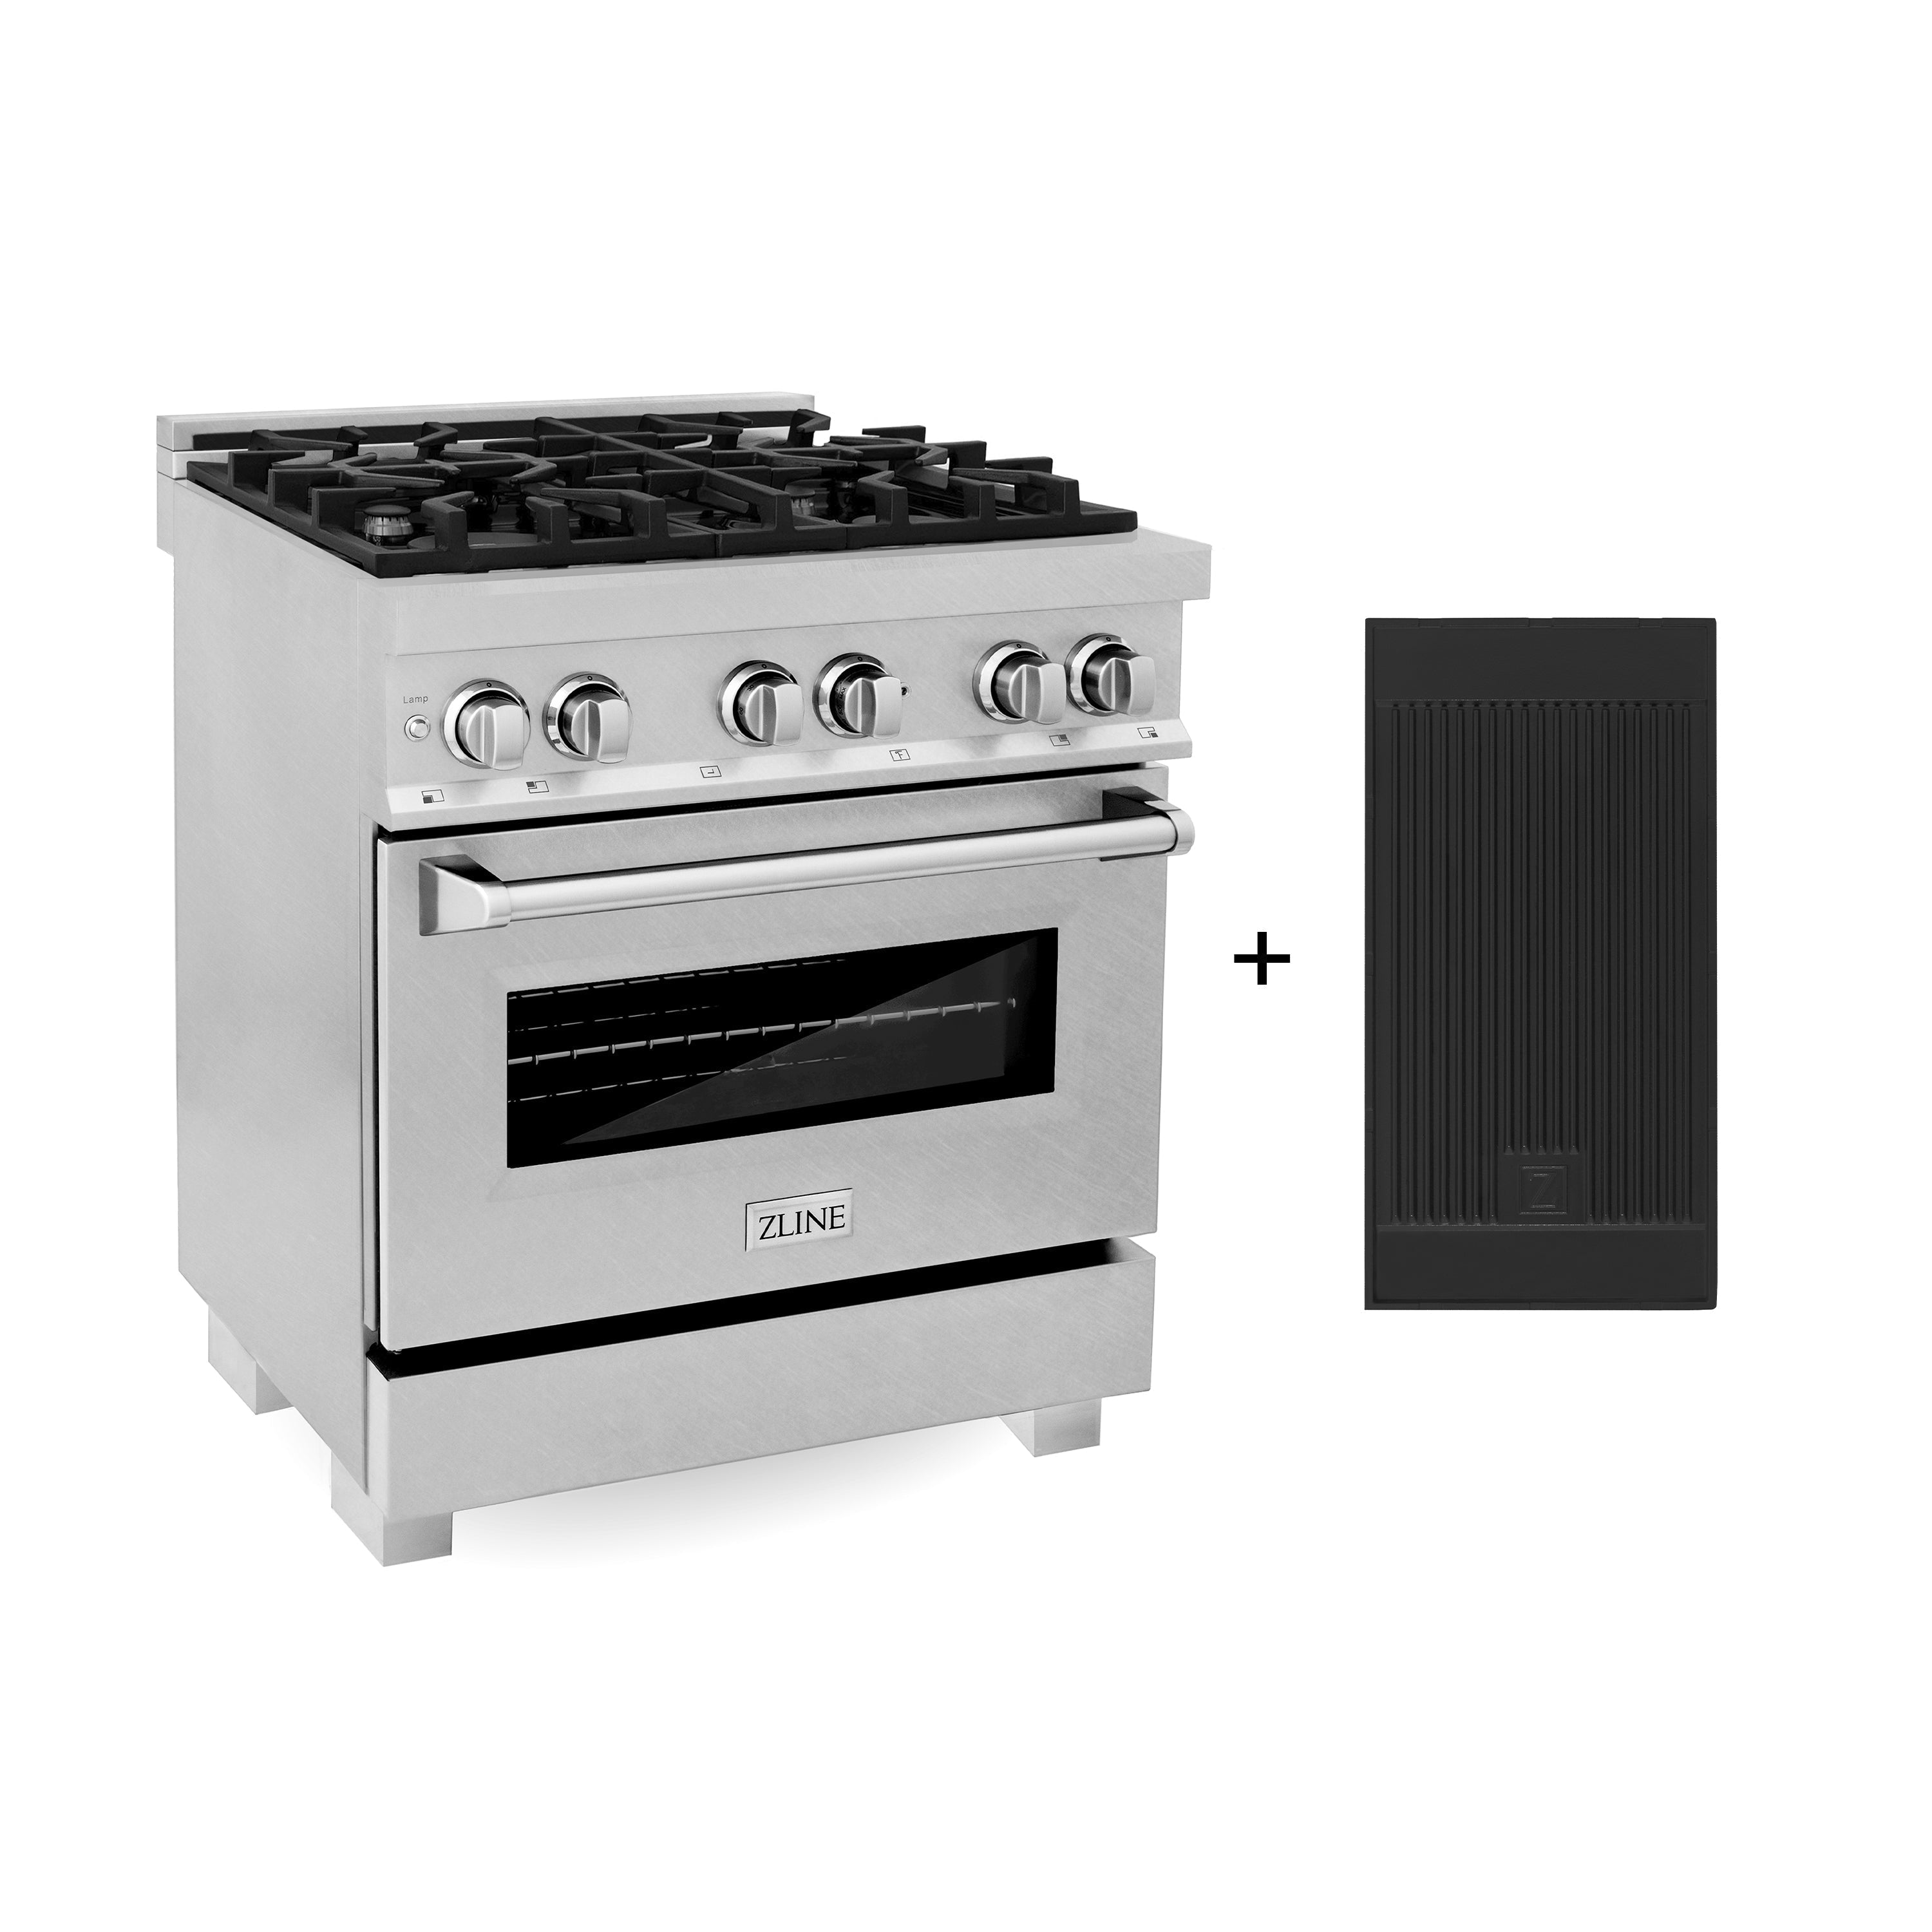 ZLINE 30" 4.0 cu. ft. Electric Oven and Gas Cooktop Dual Fuel Range with Griddle in Fingerprint Resistant Stainless (RAS-SN-GR-30)